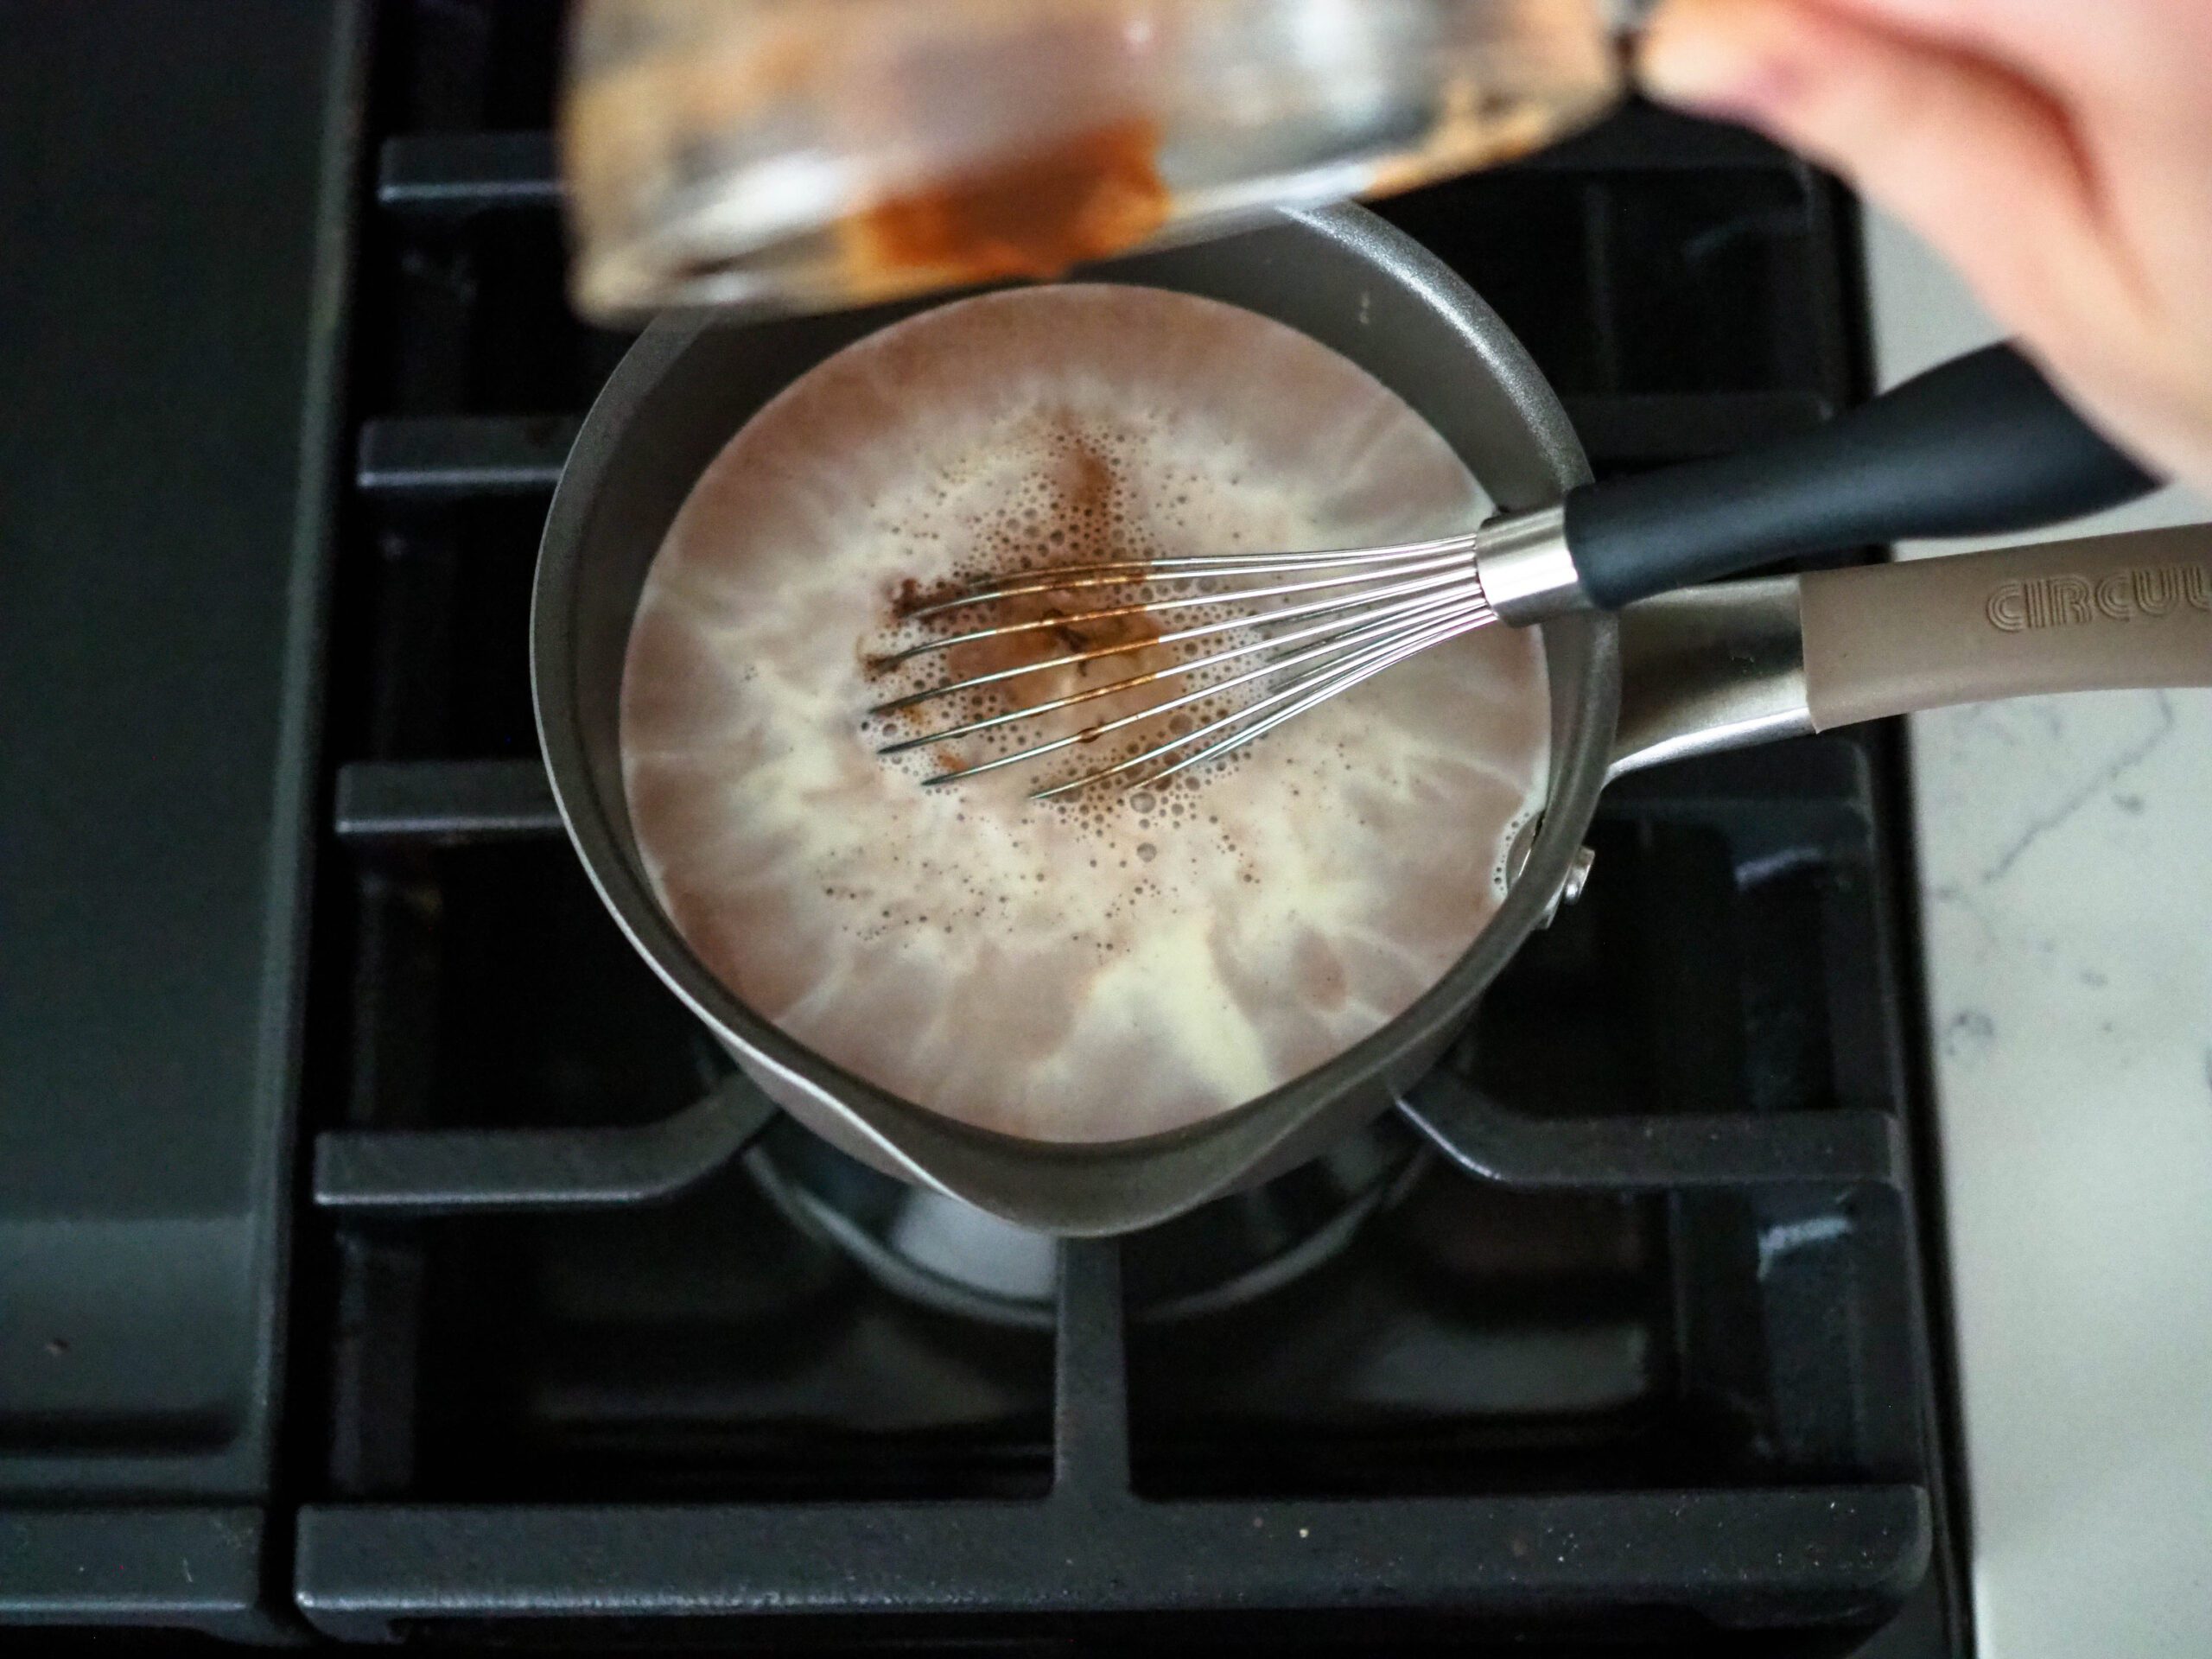 A hand pours bloomed cocoa powder into a small saucepan filled with cream and milk.